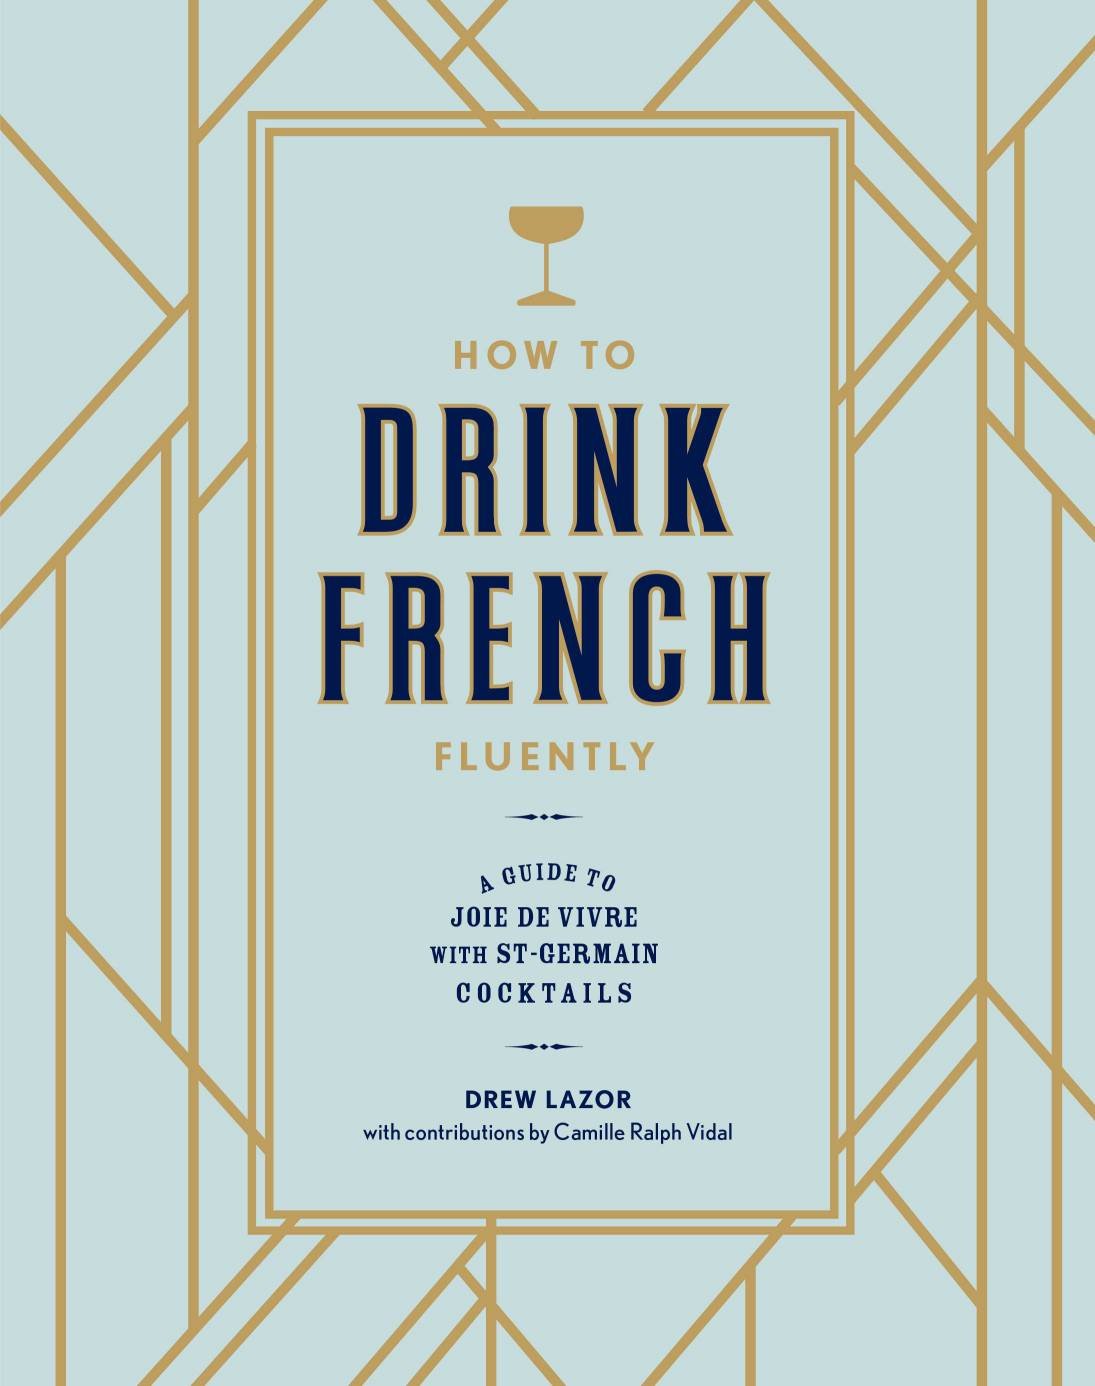 livre bouquin drink French fluently Camille Vidal